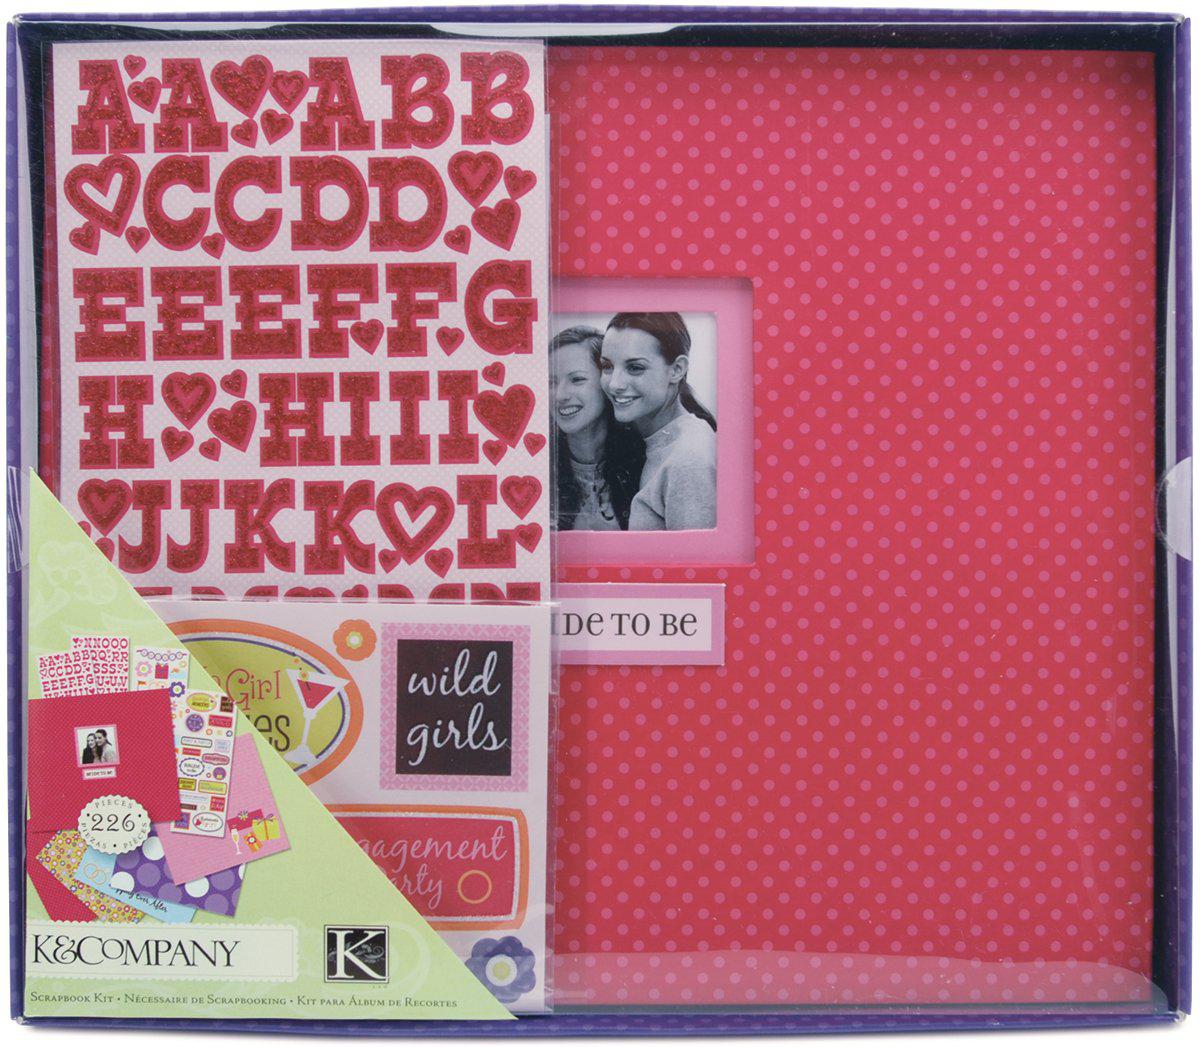 K&Company postbound scrapbook kit boxed 8-inch by 8-1/2-inch, bride to be